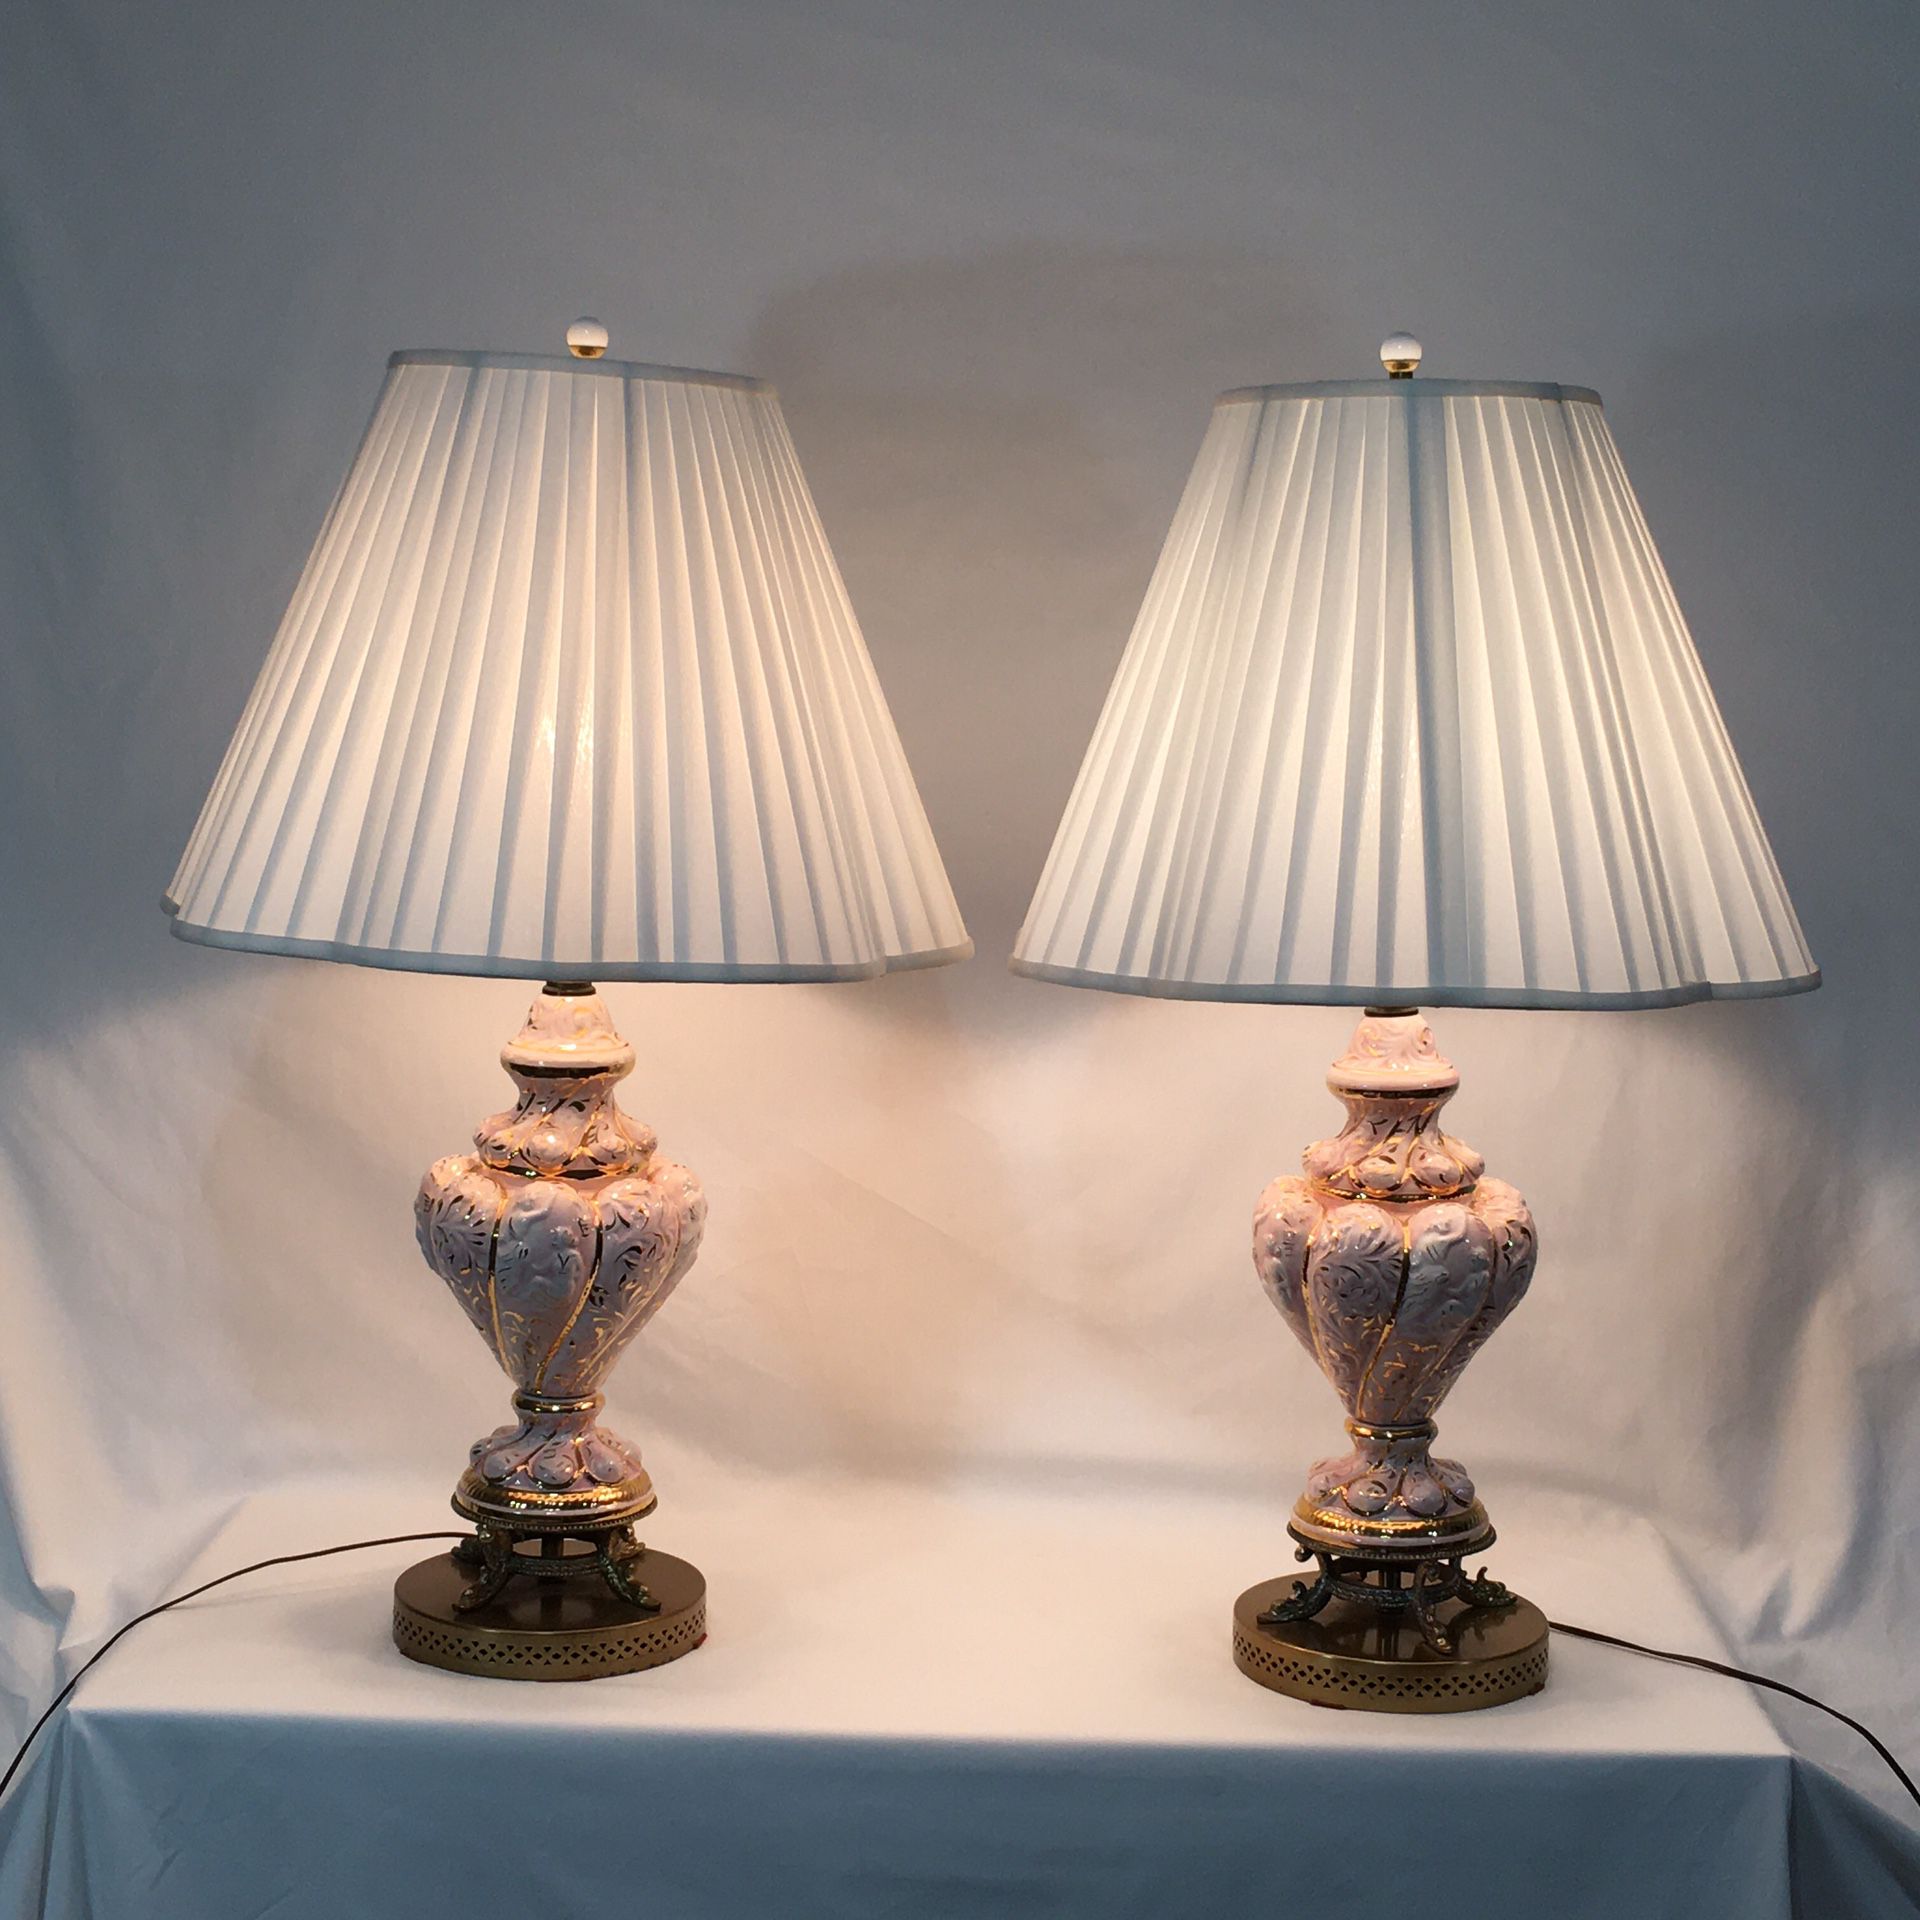 2 Vintage Italian Pink & Gold Capodimonte Antique Table Lamps with Lamp Shades